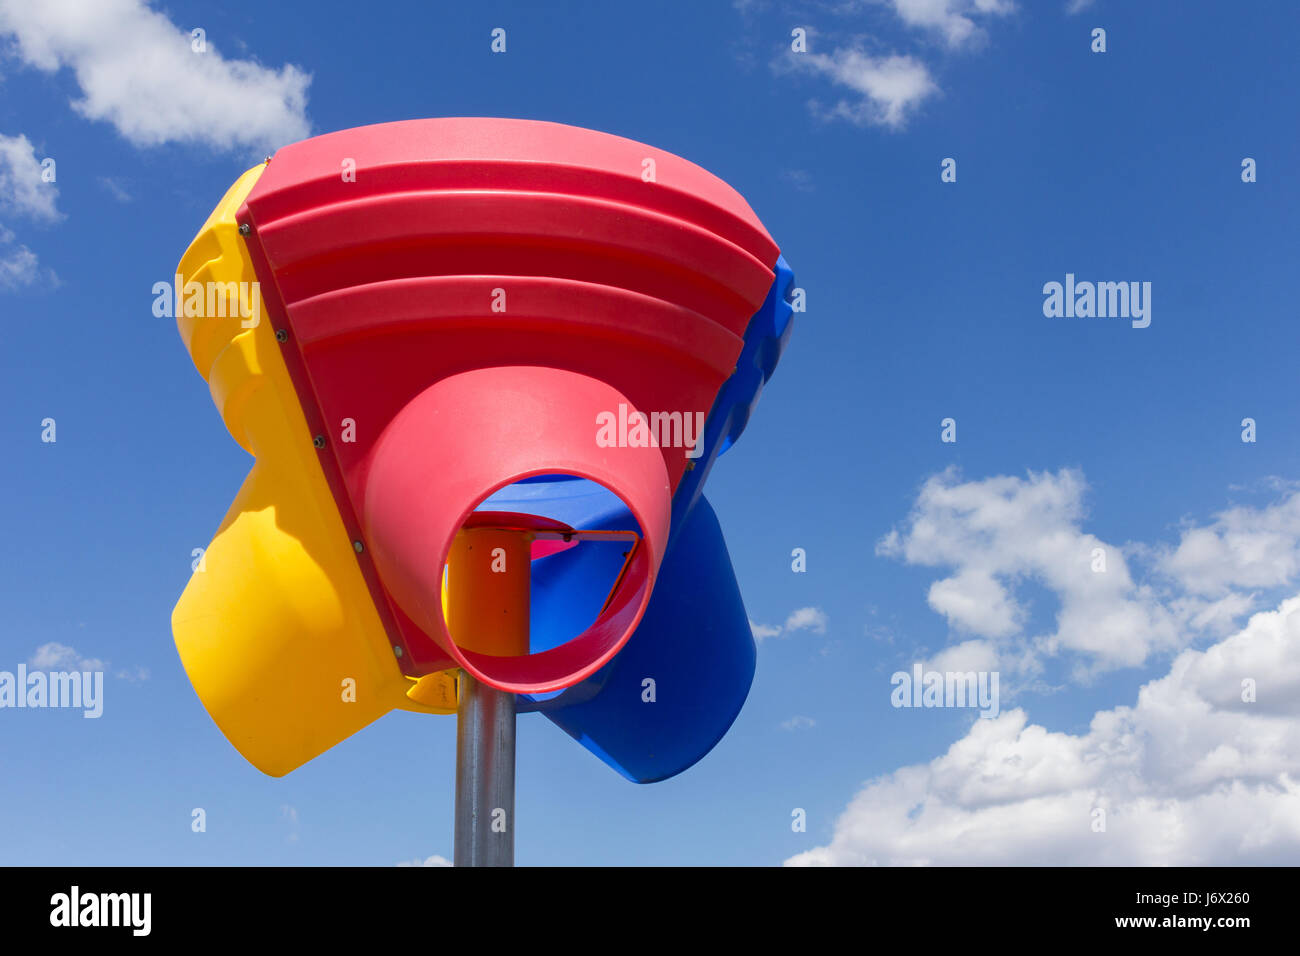 A funnel ball post at a playground Stock Photo - Alamy